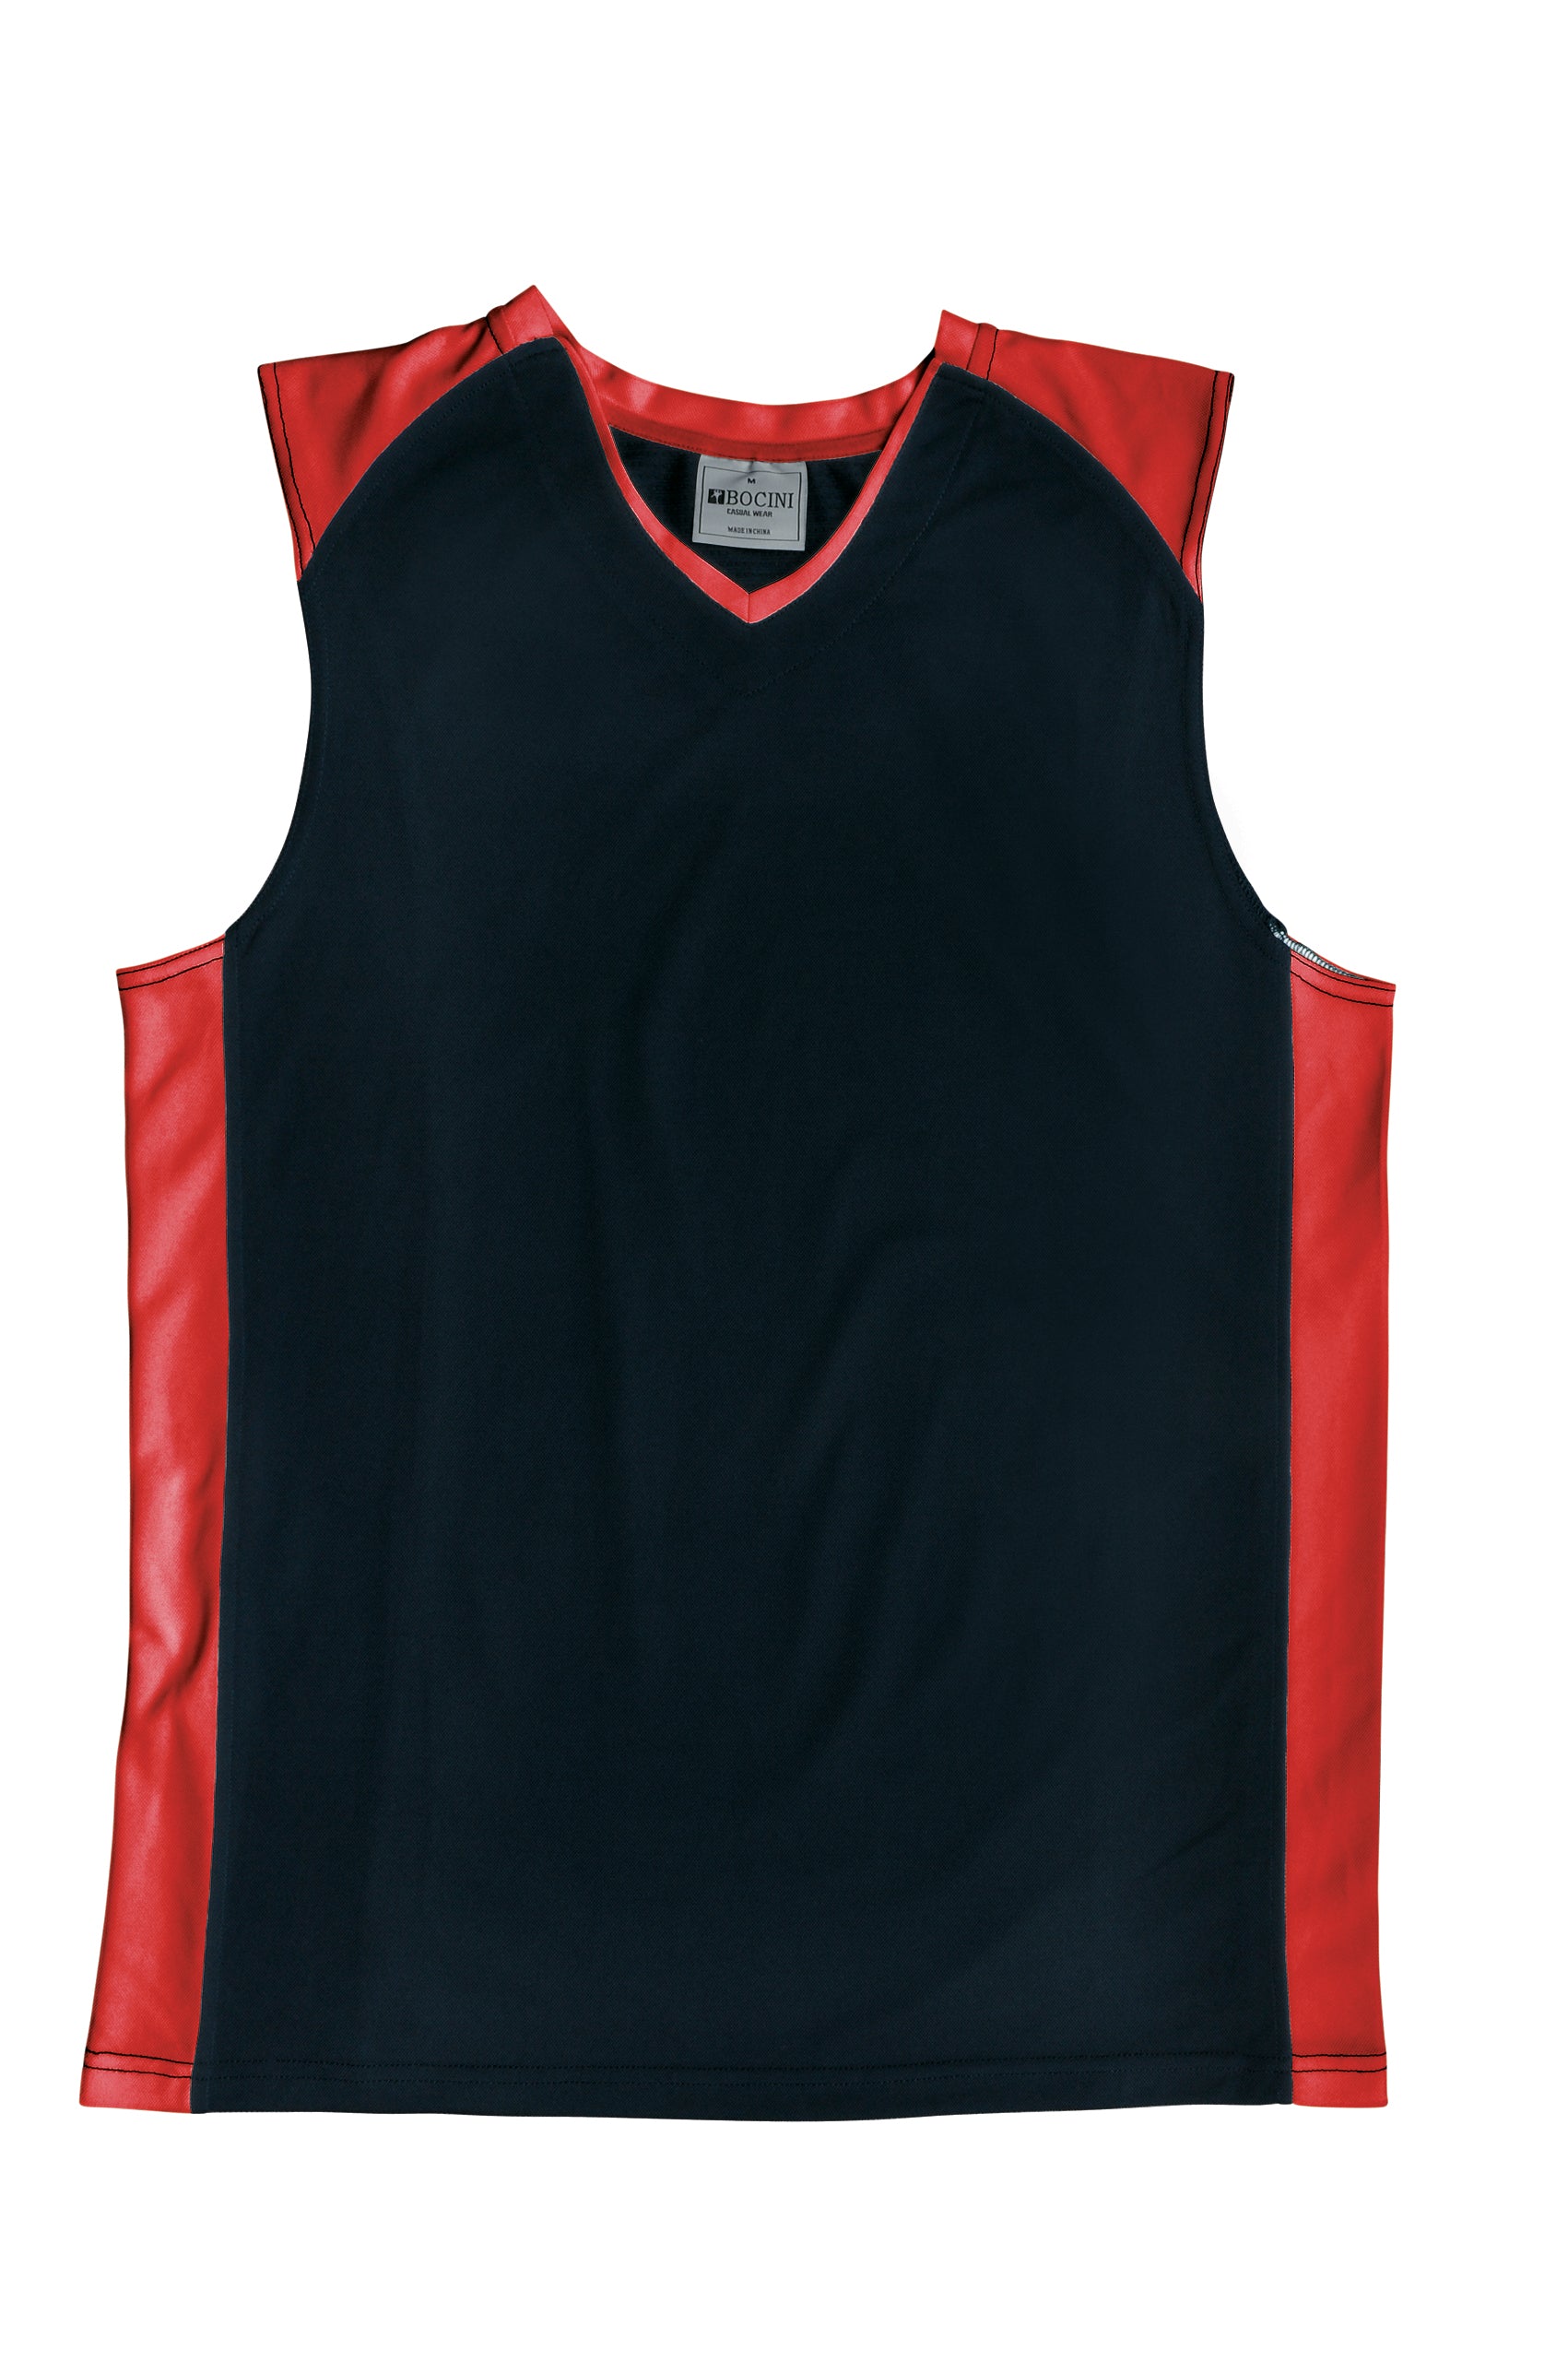 Black and Red Best Basketball Jersey Design - China Mens